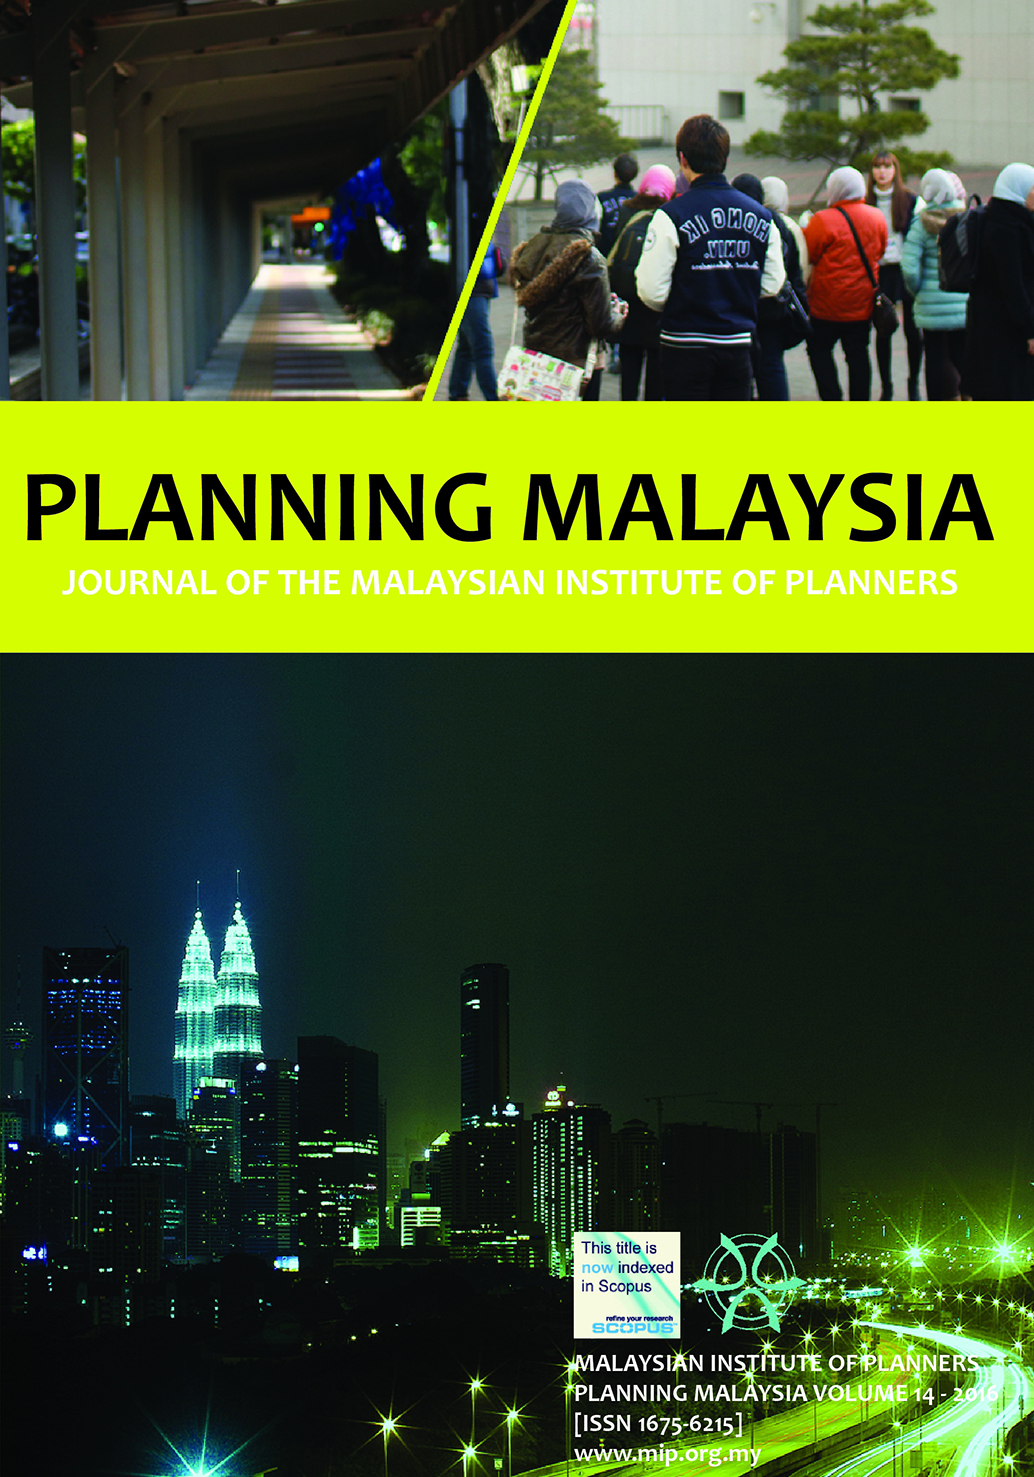 					View Vol. 14 (2016): PLANNING MALAYSIA JOURNAL : Volume 14, 2016
				